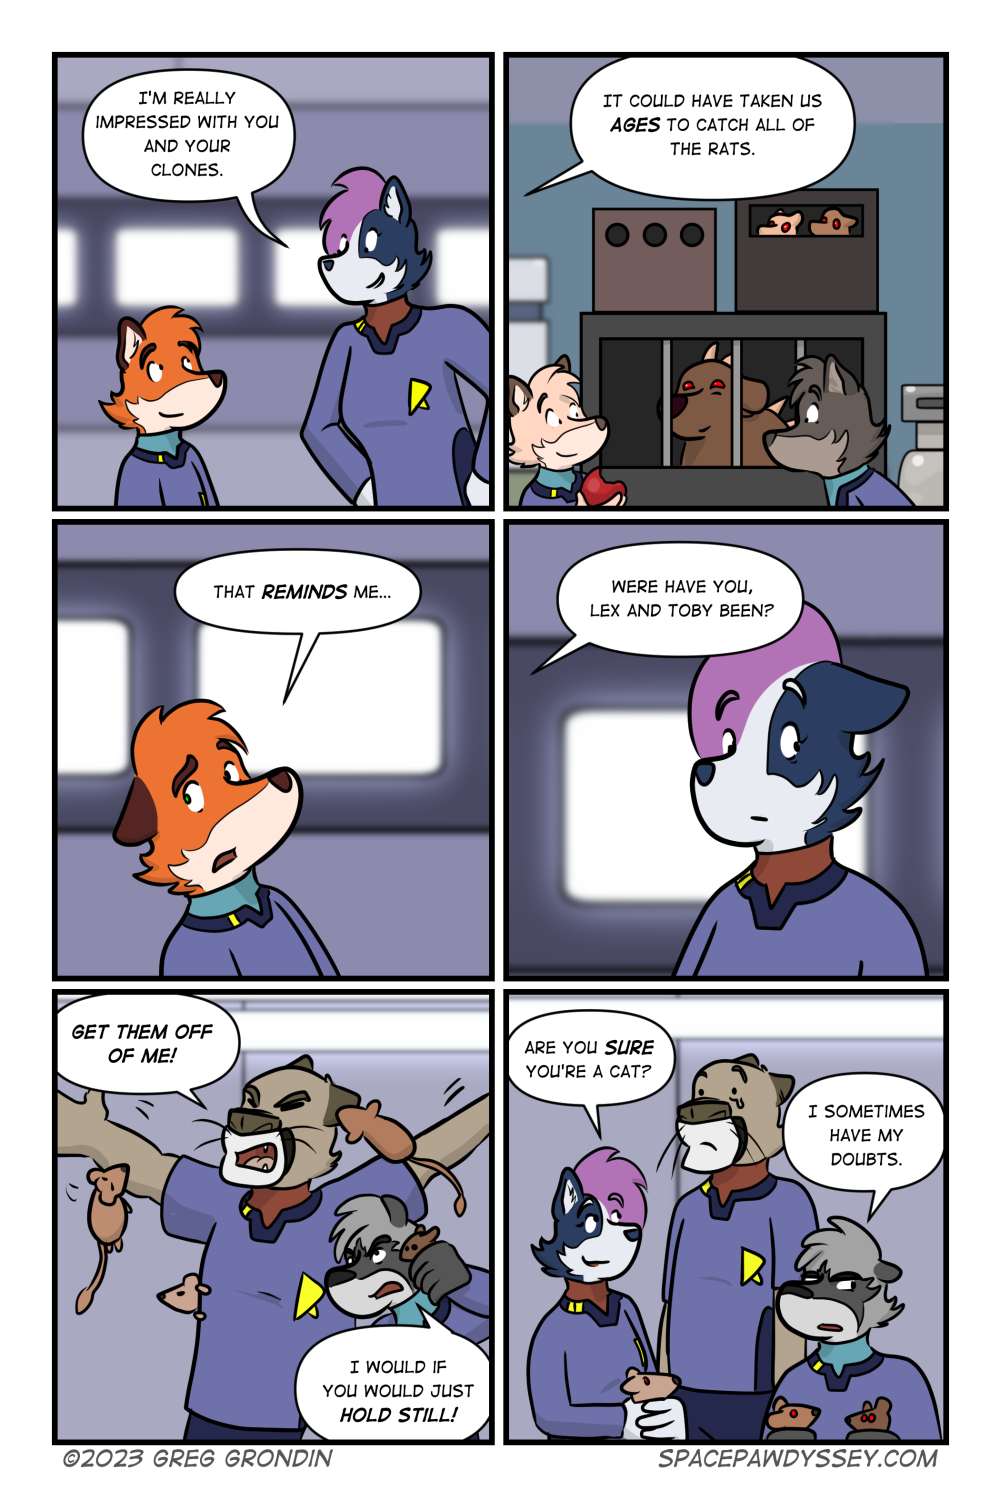 Space Pawdyssey #624